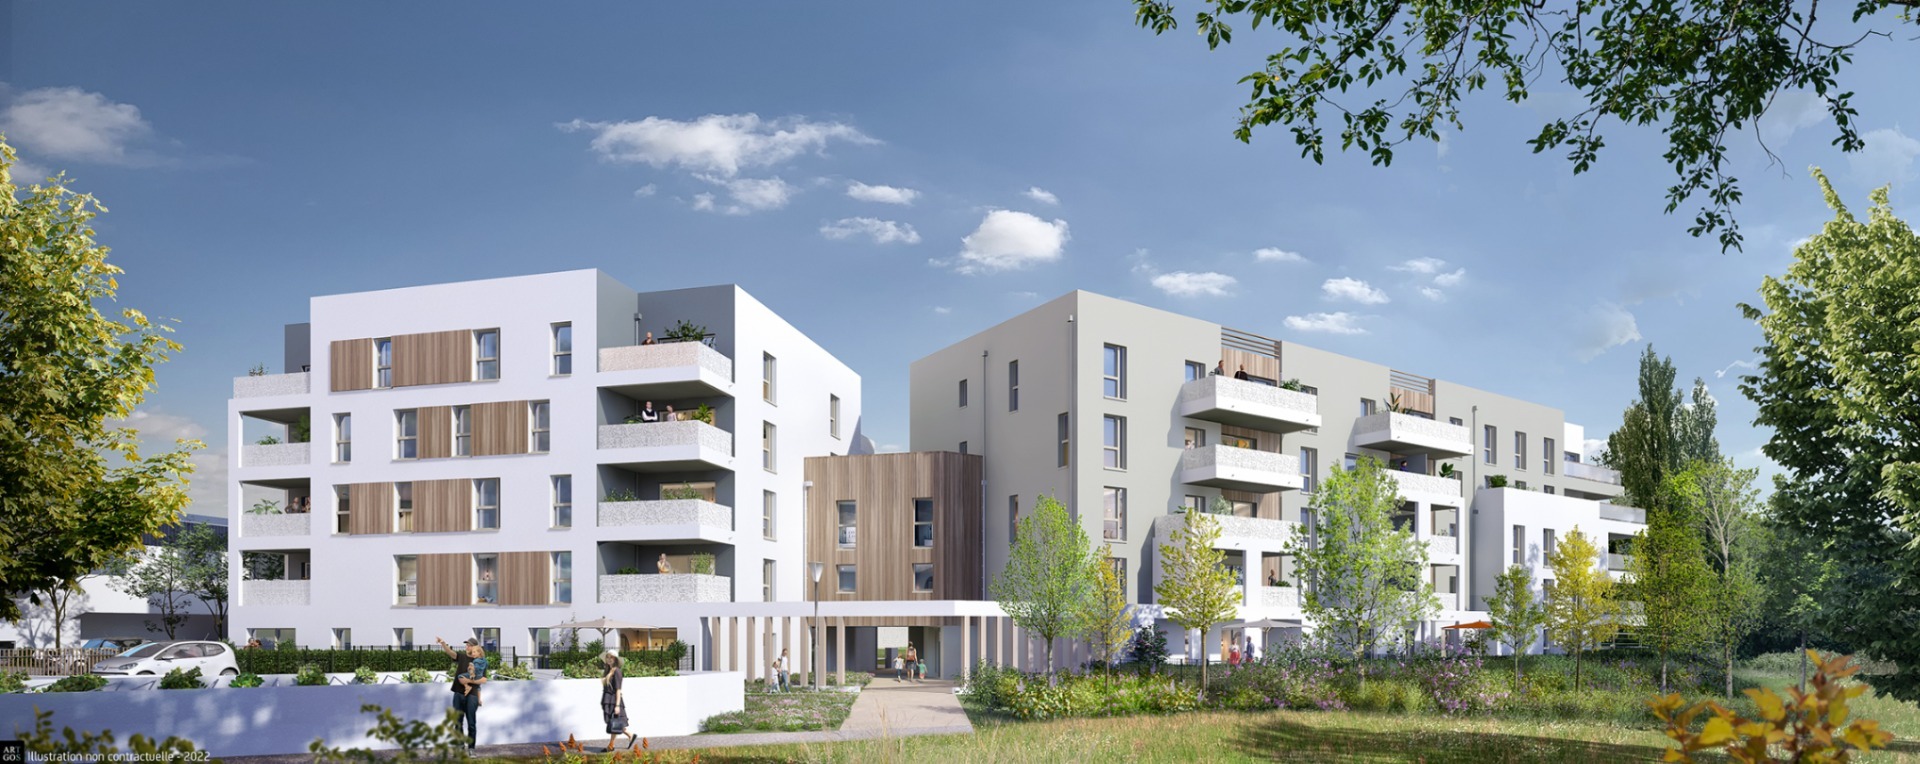 Programme immobilier neuf NATURE